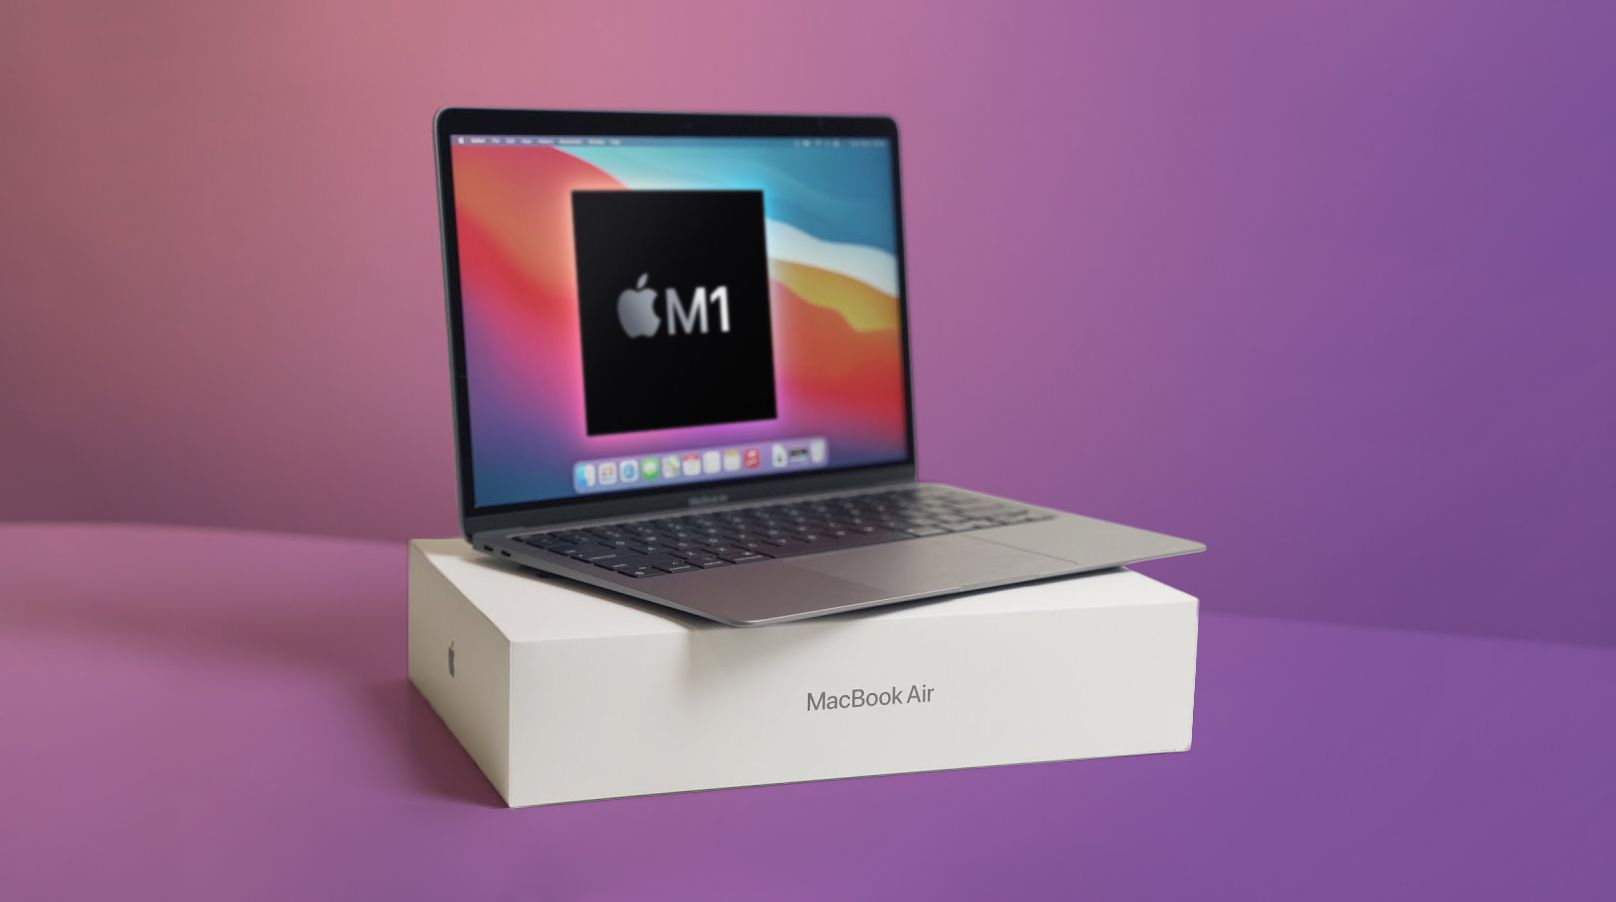 Deals: Get Apple's 512GB M1 MacBook Air for New Low Price of $1,049.99 ($199 Off..